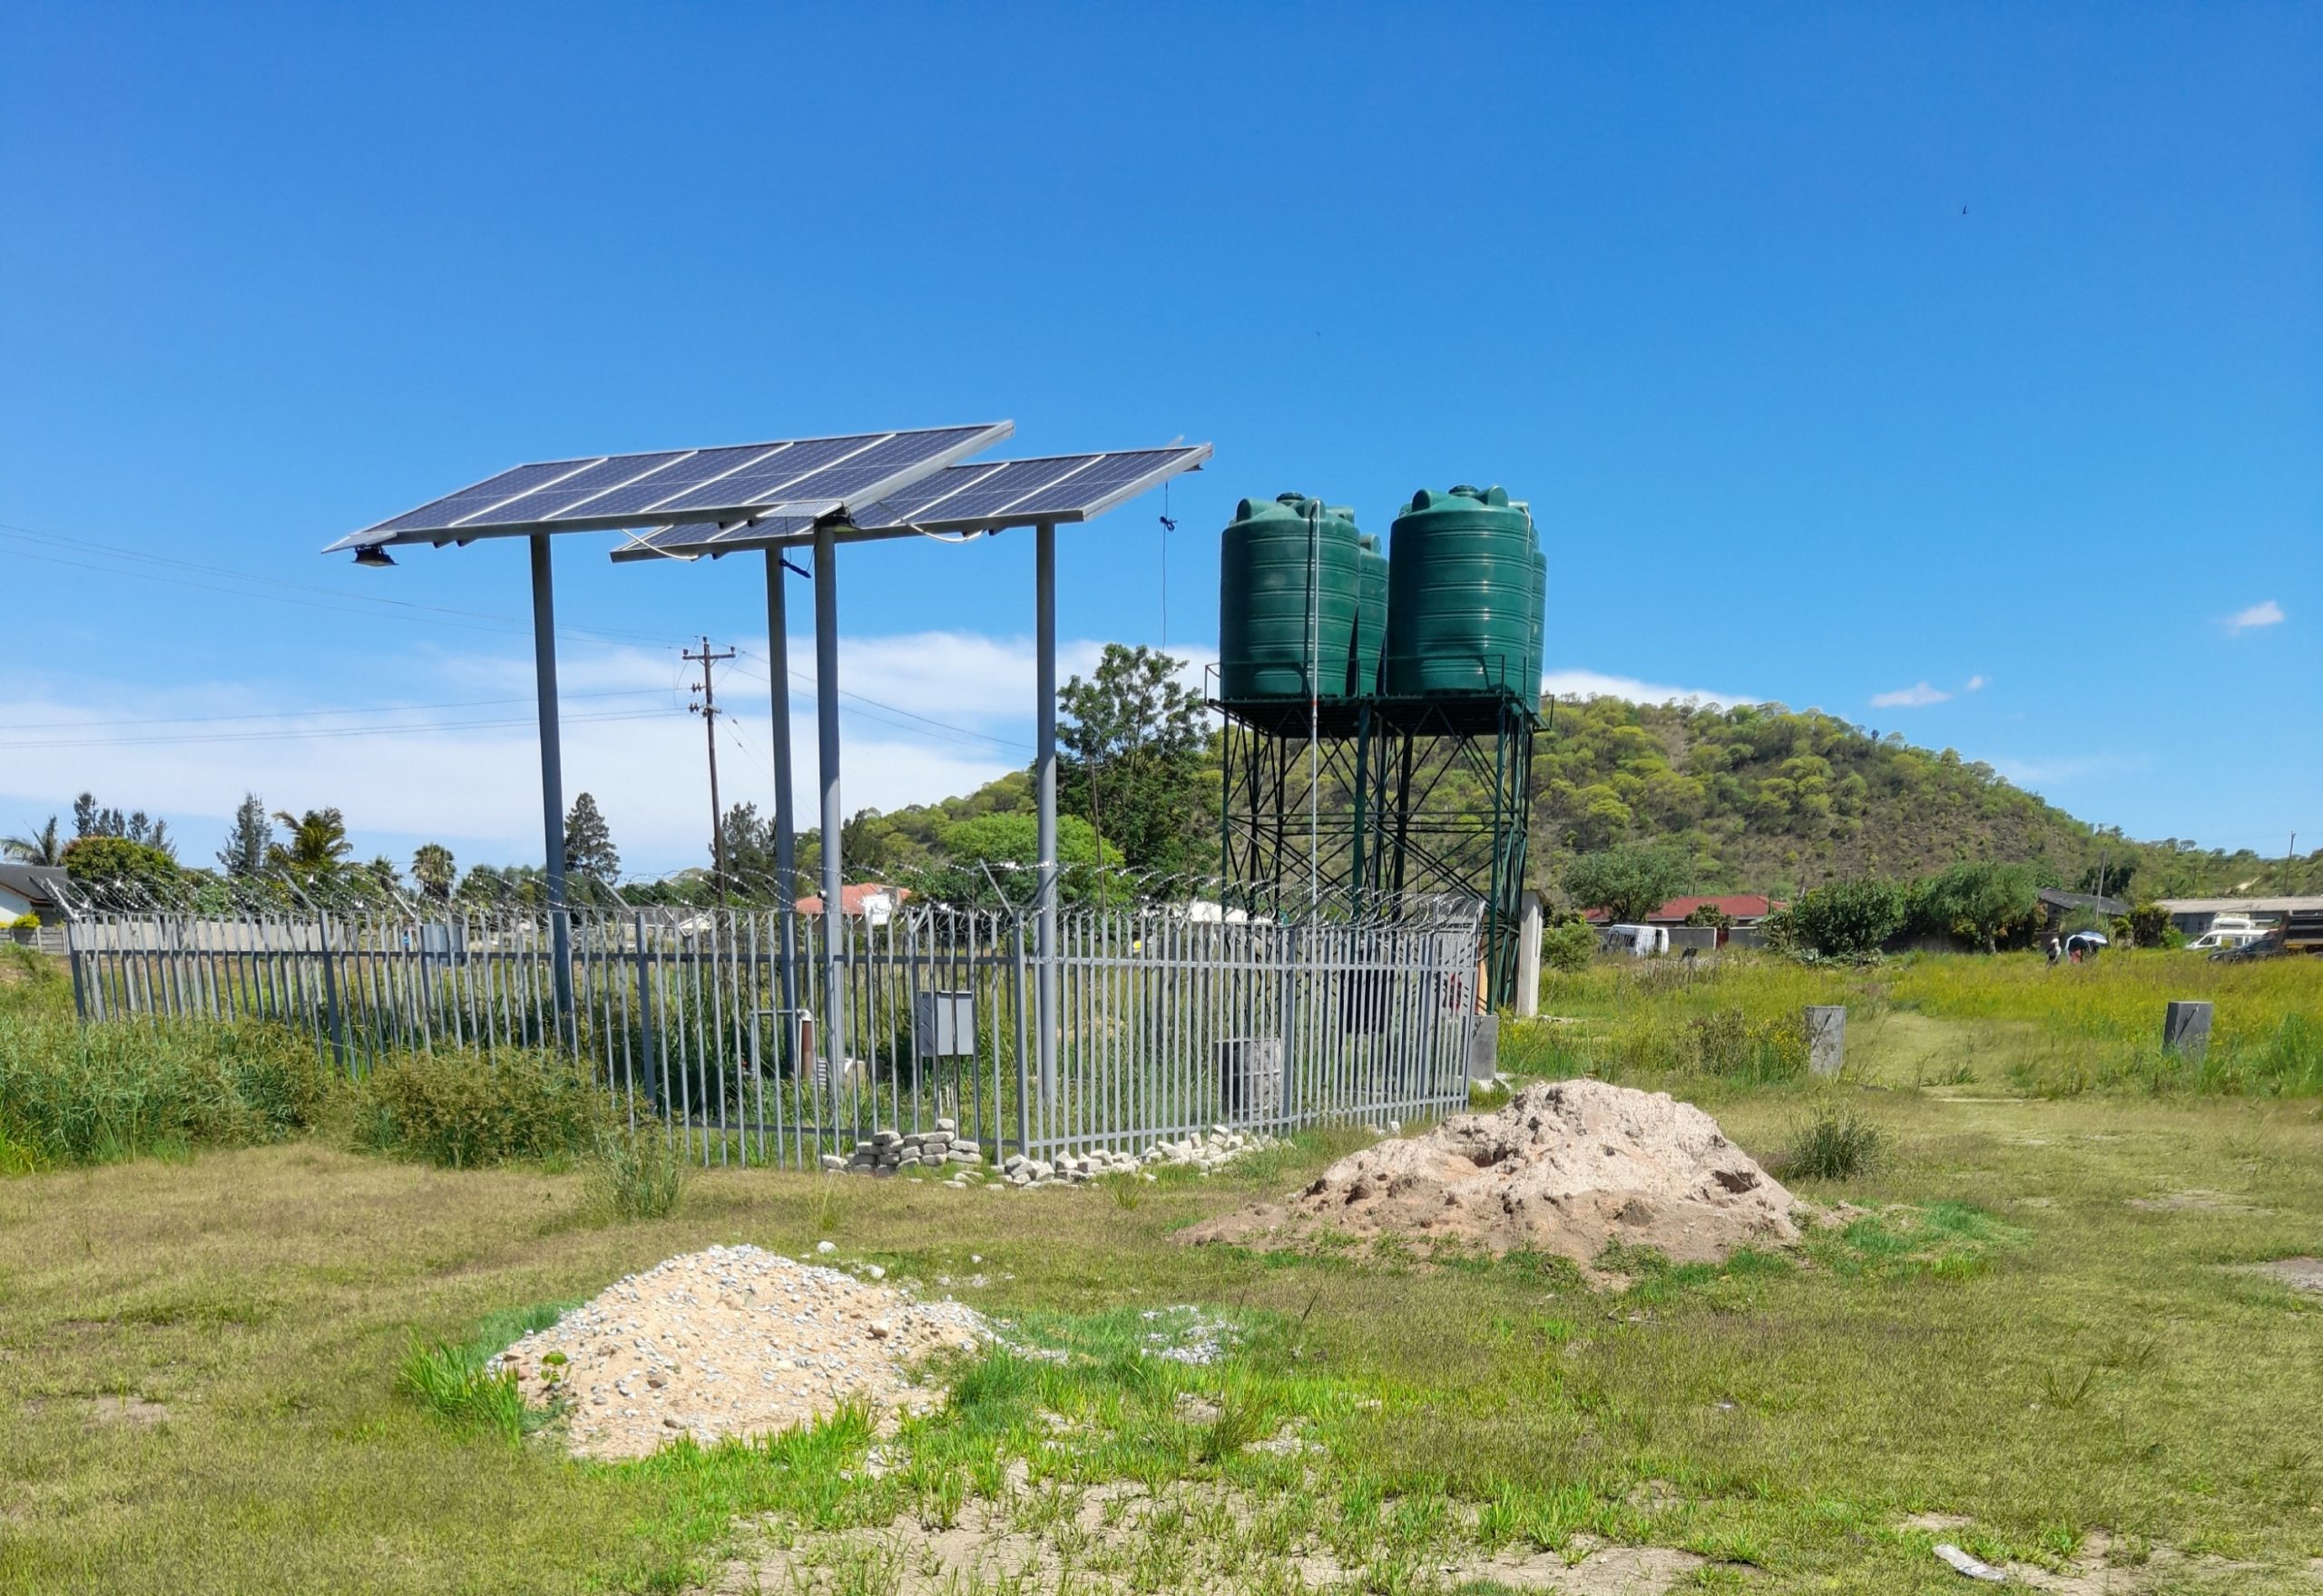 ‘Proliferation of boreholes could harm the environment’